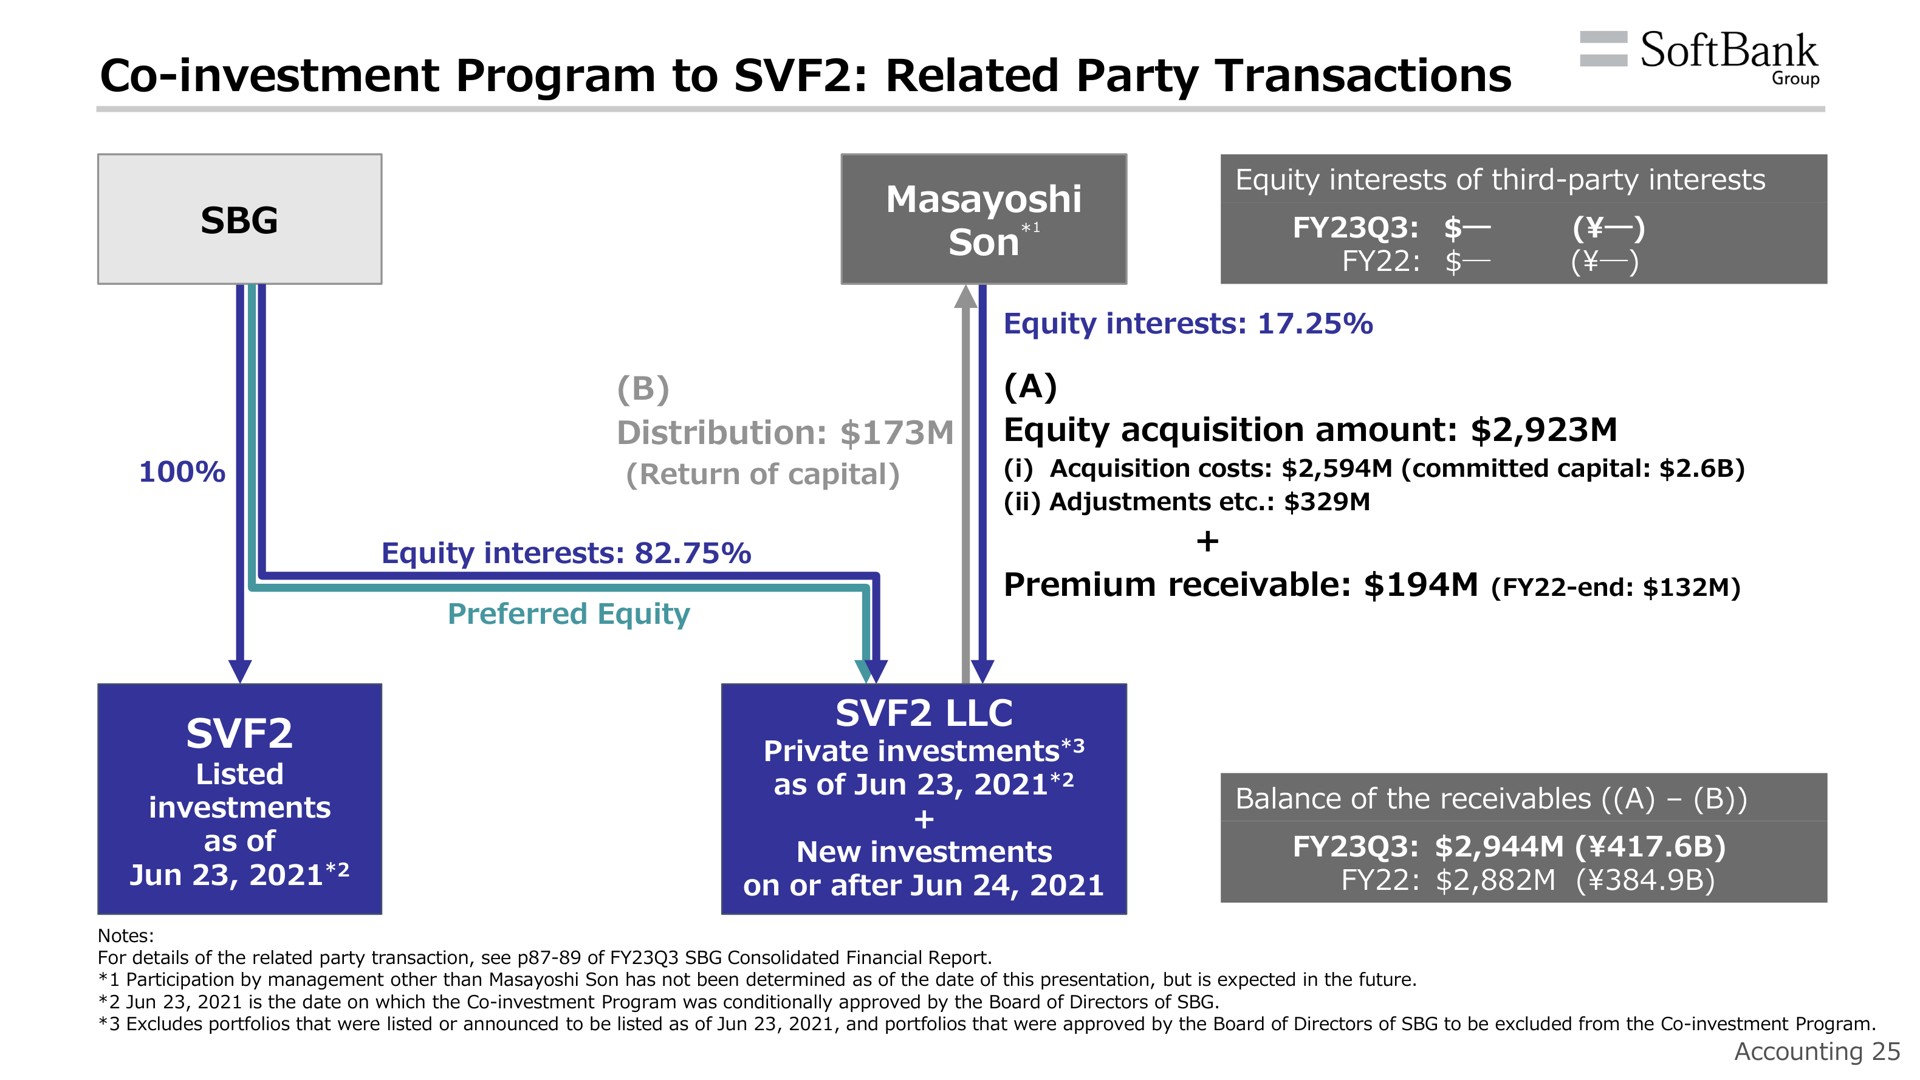 investment program to related party transactions son a as of | SoftBank